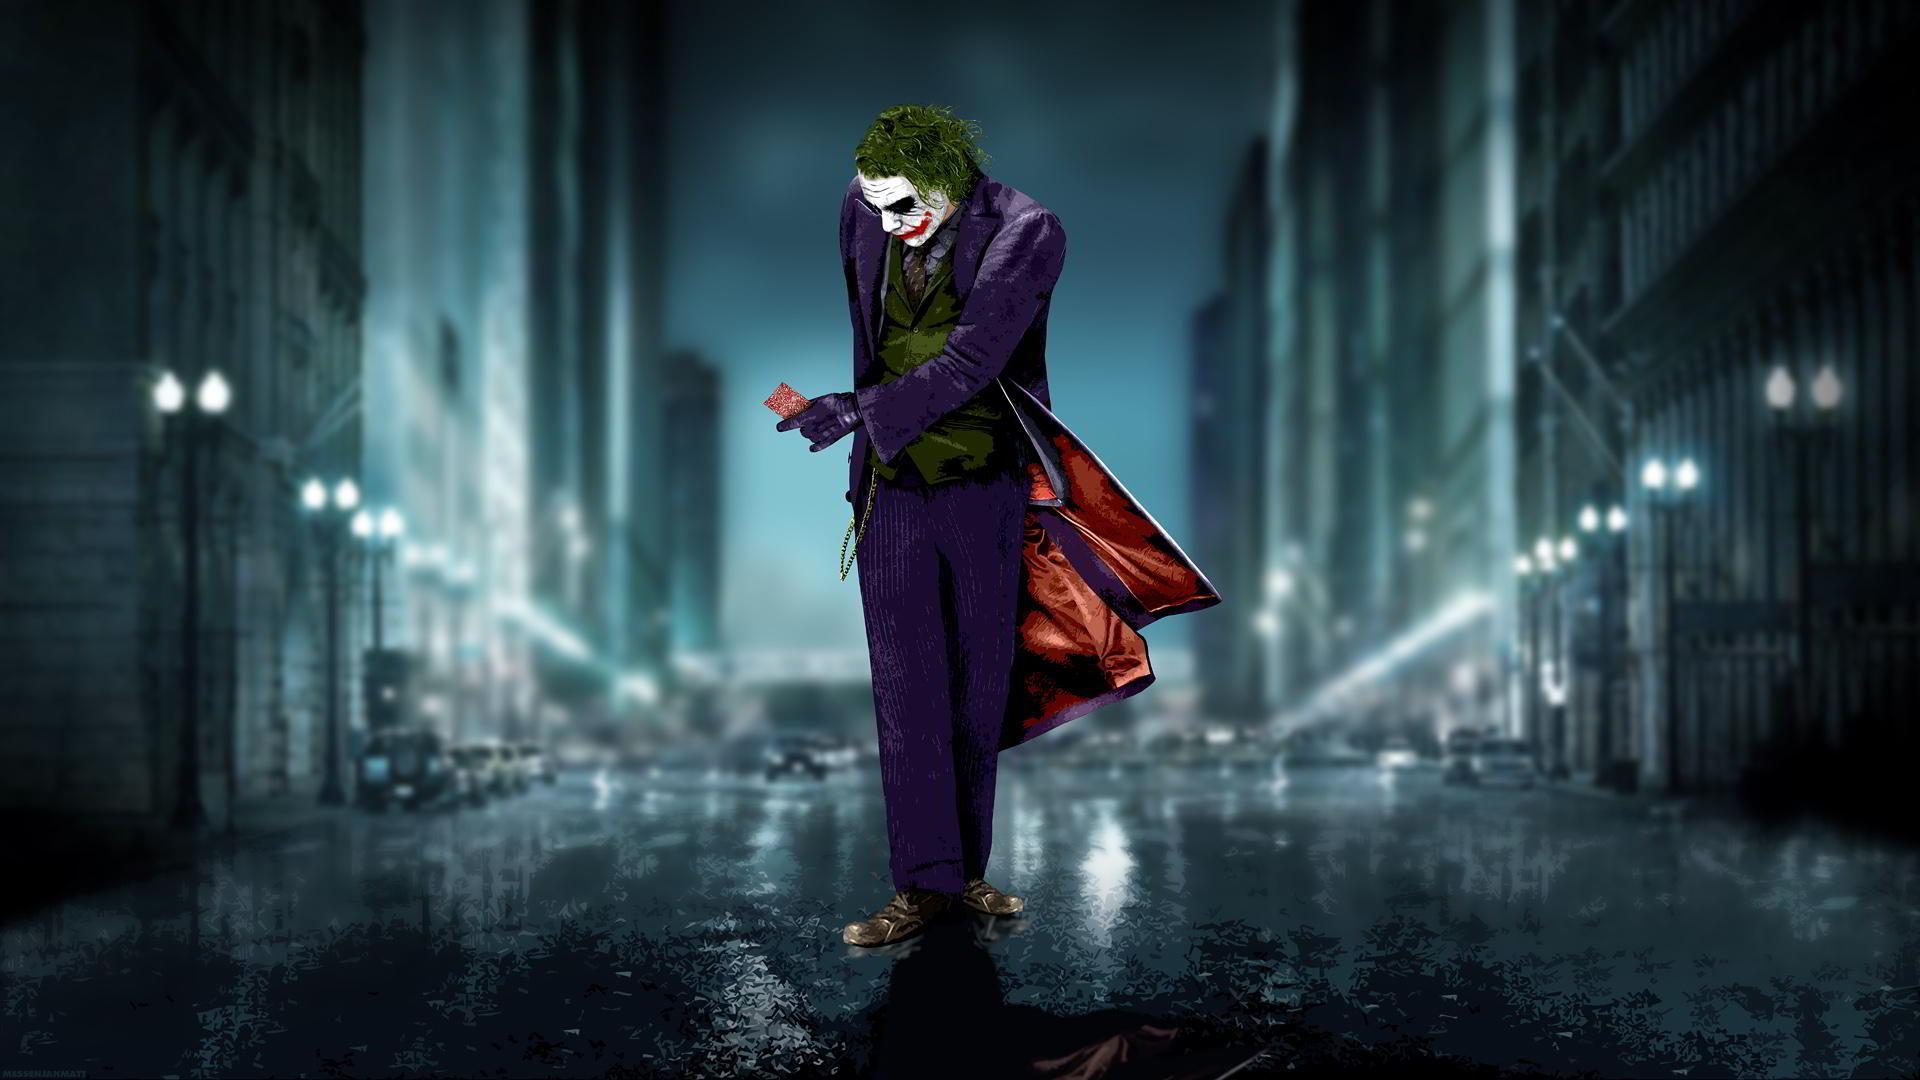 Why So Serious Wallpapers 1080p Wallpaper Cave